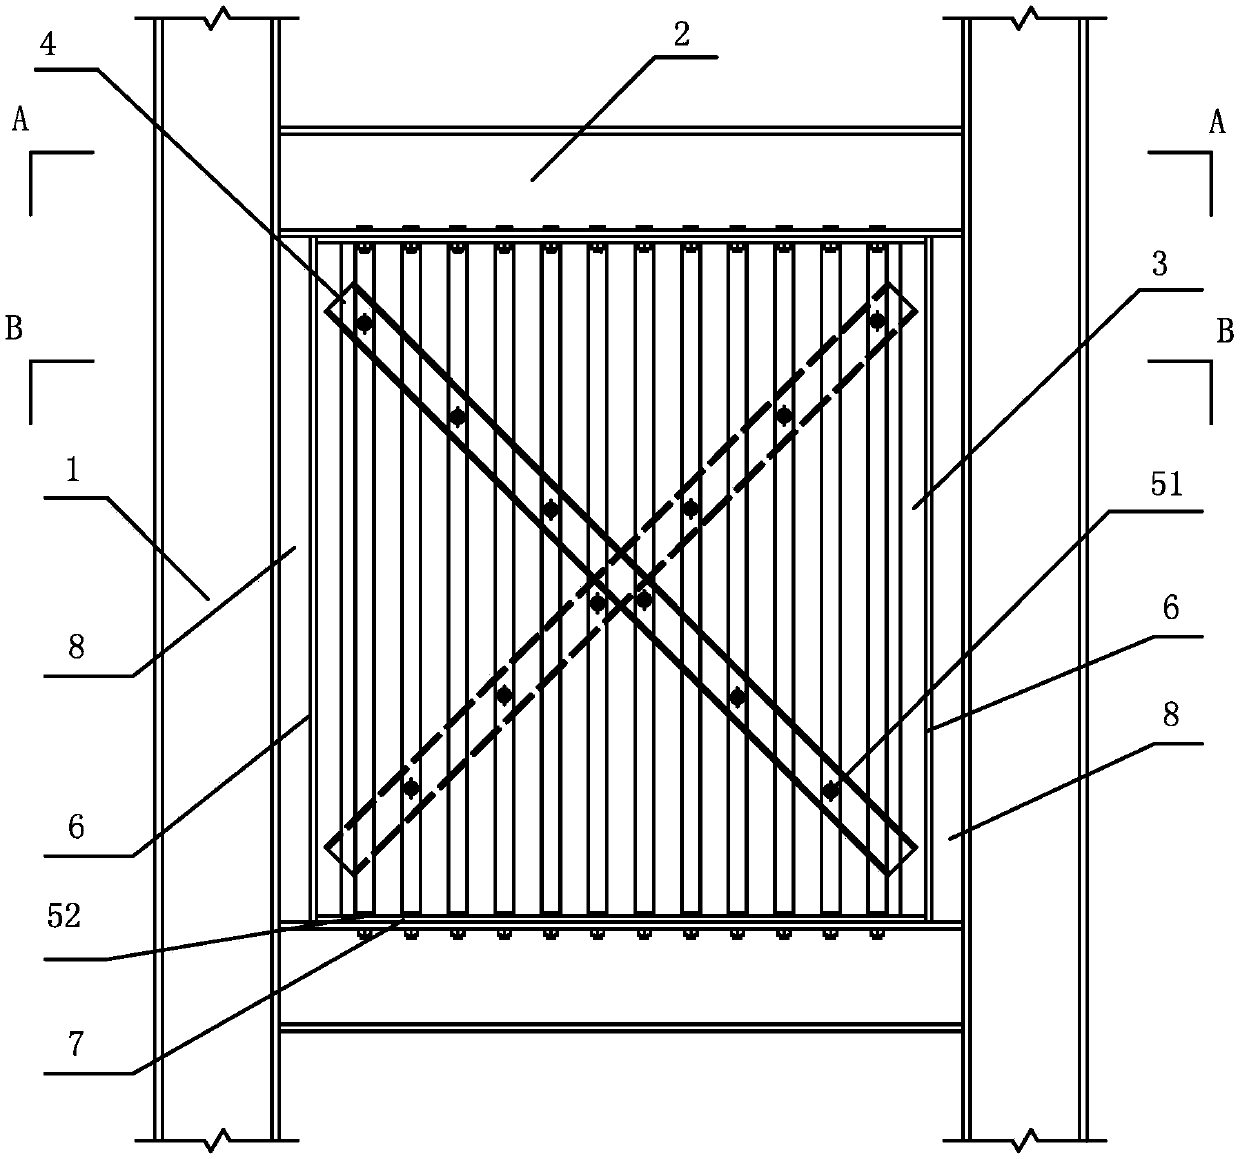 A cross-stiffened steel plate shear wall with side slits